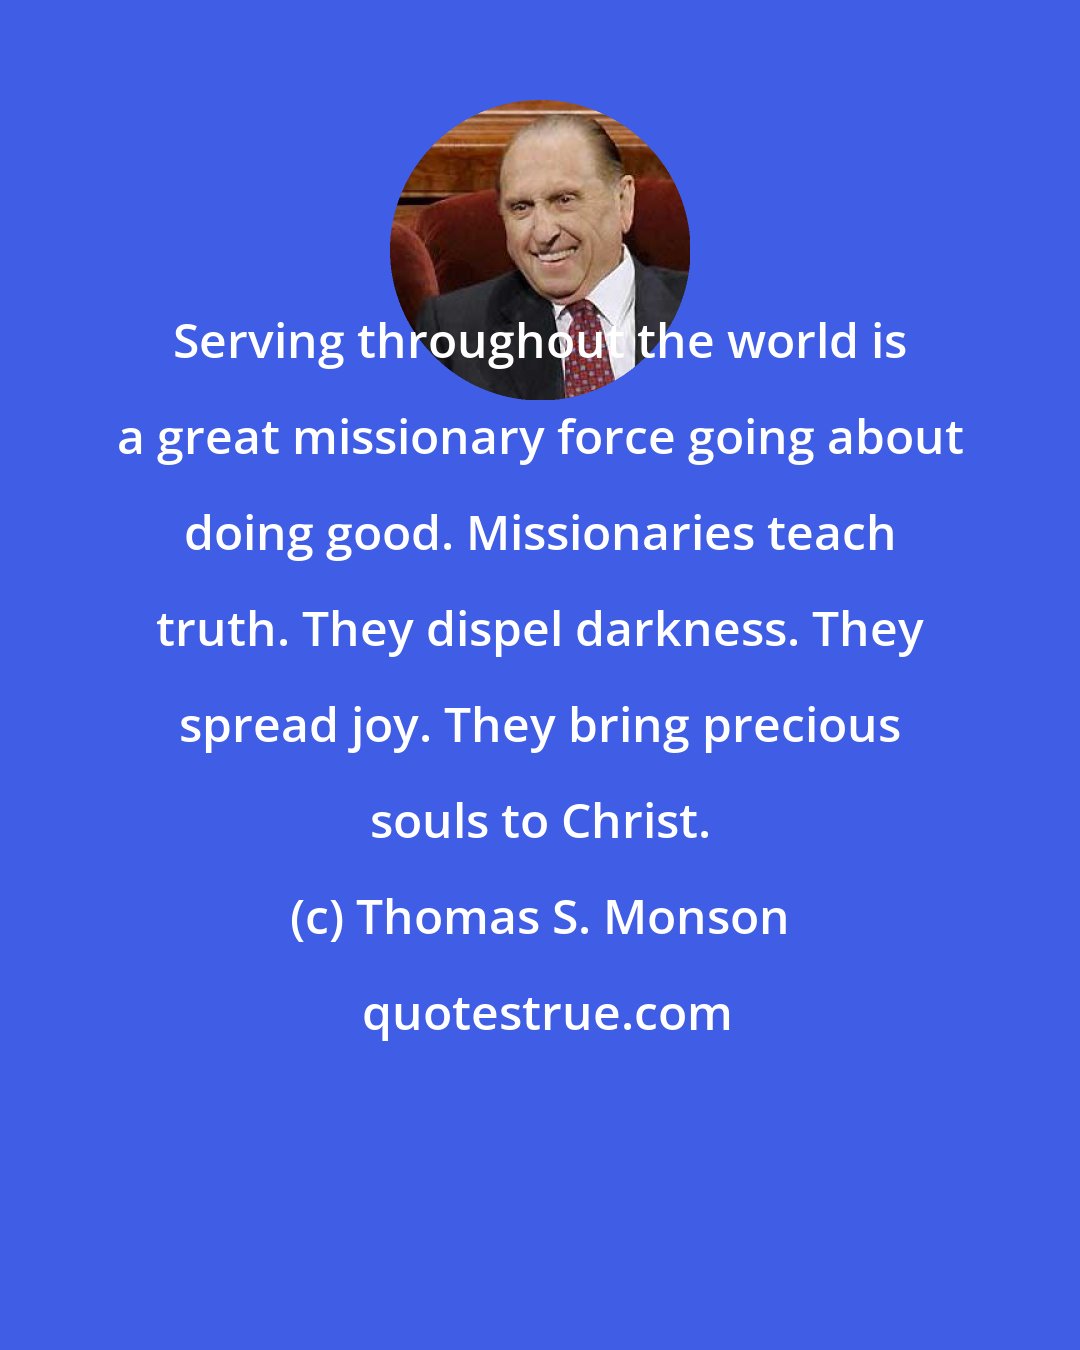 Thomas S. Monson: Serving throughout the world is a great missionary force going about doing good. Missionaries teach truth. They dispel darkness. They spread joy. They bring precious souls to Christ.